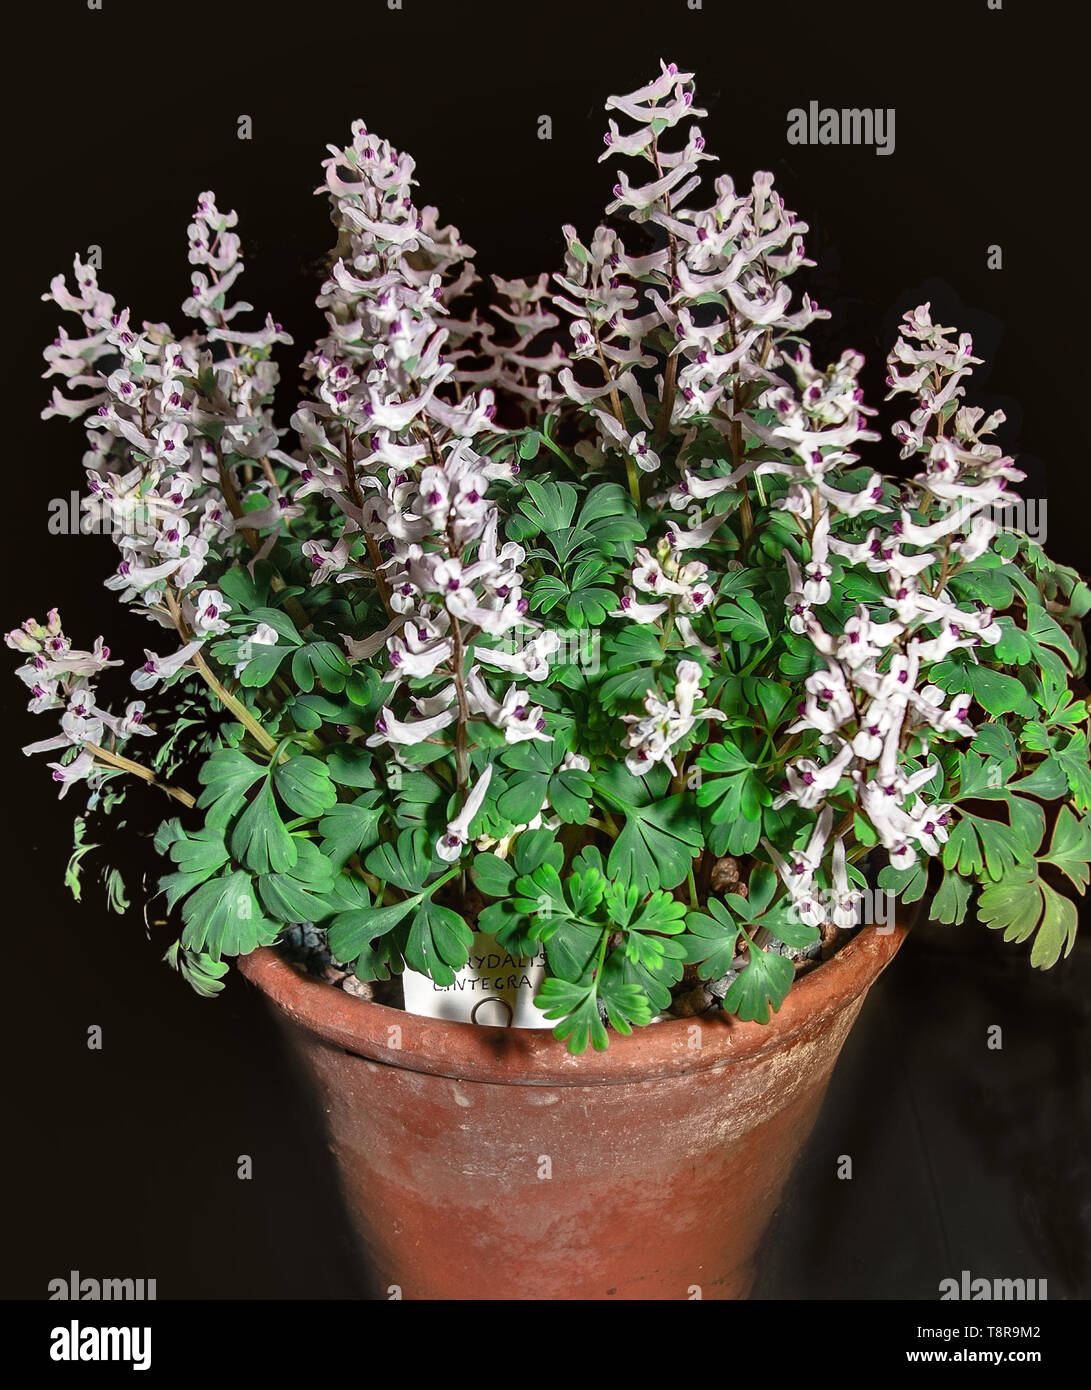 Corydalis integra a hardy alpine plant suitable for rockeries grown as a container plant for show. Stock Photo